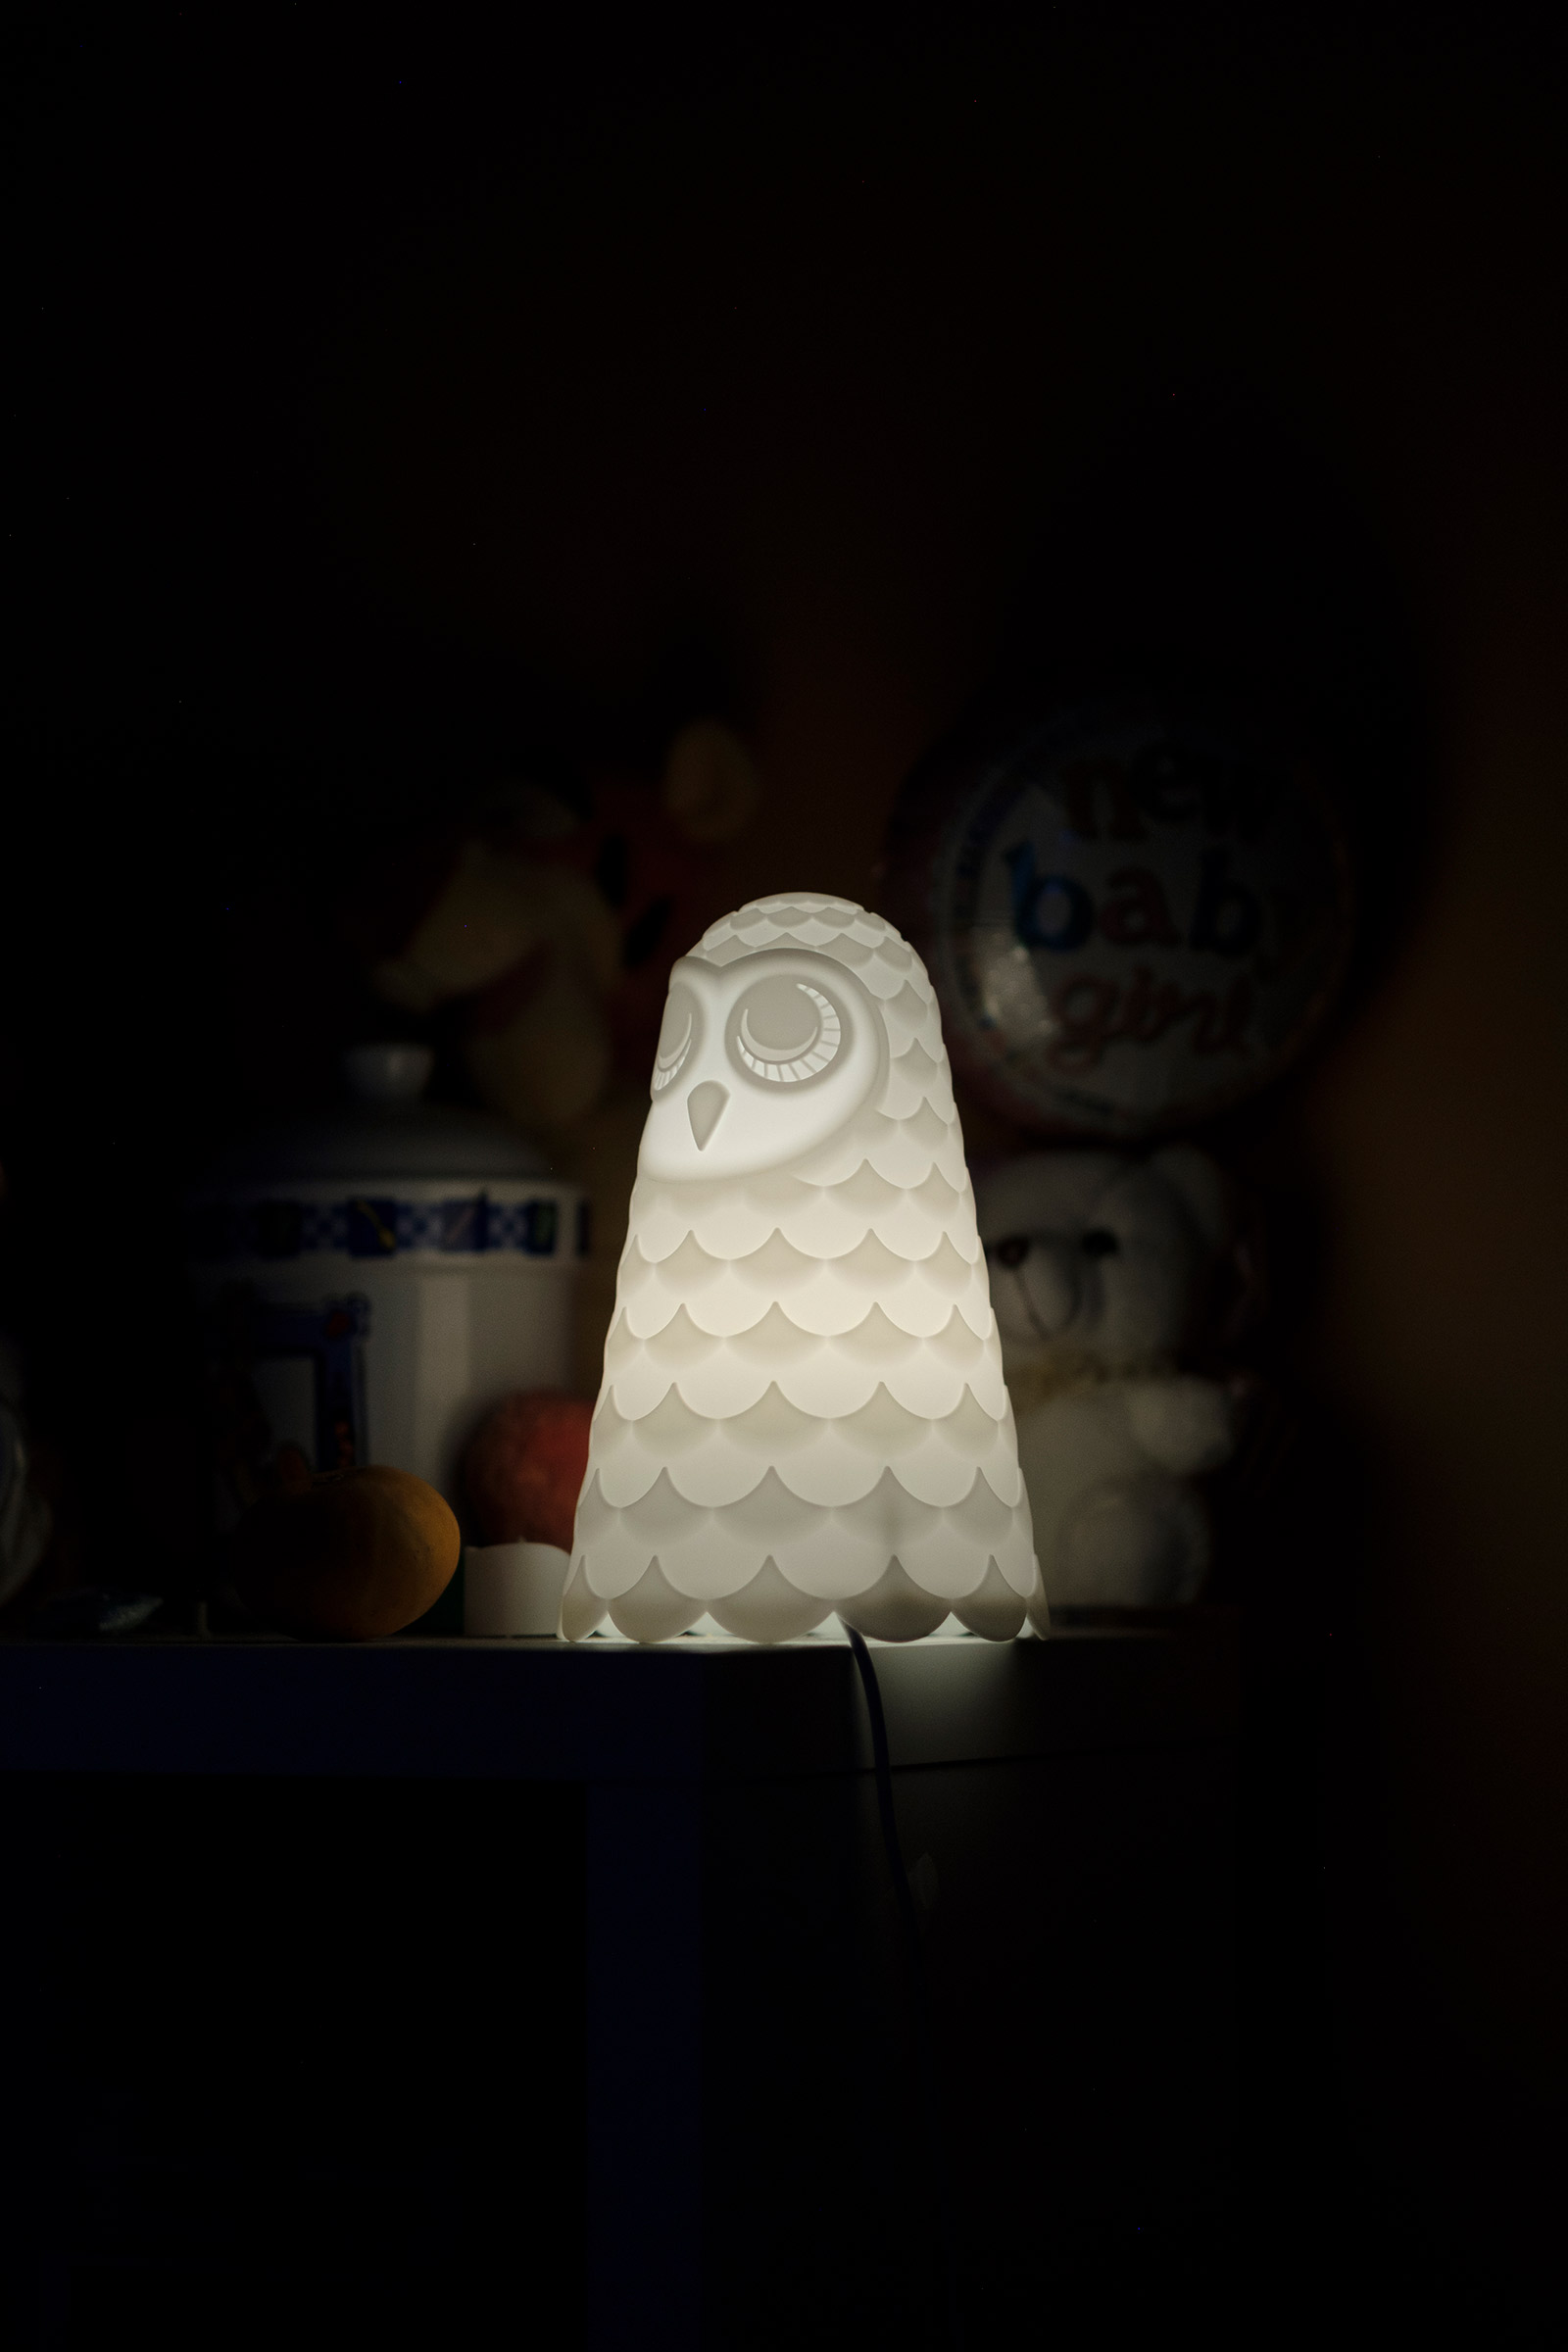 A lamp in Elsie Addison’s bedroom that her father, Martin, used to turn off before he passed away from COVID-19. Since he passed, Elsie has kept the light on at all times. (Sean Sirota for TIME)